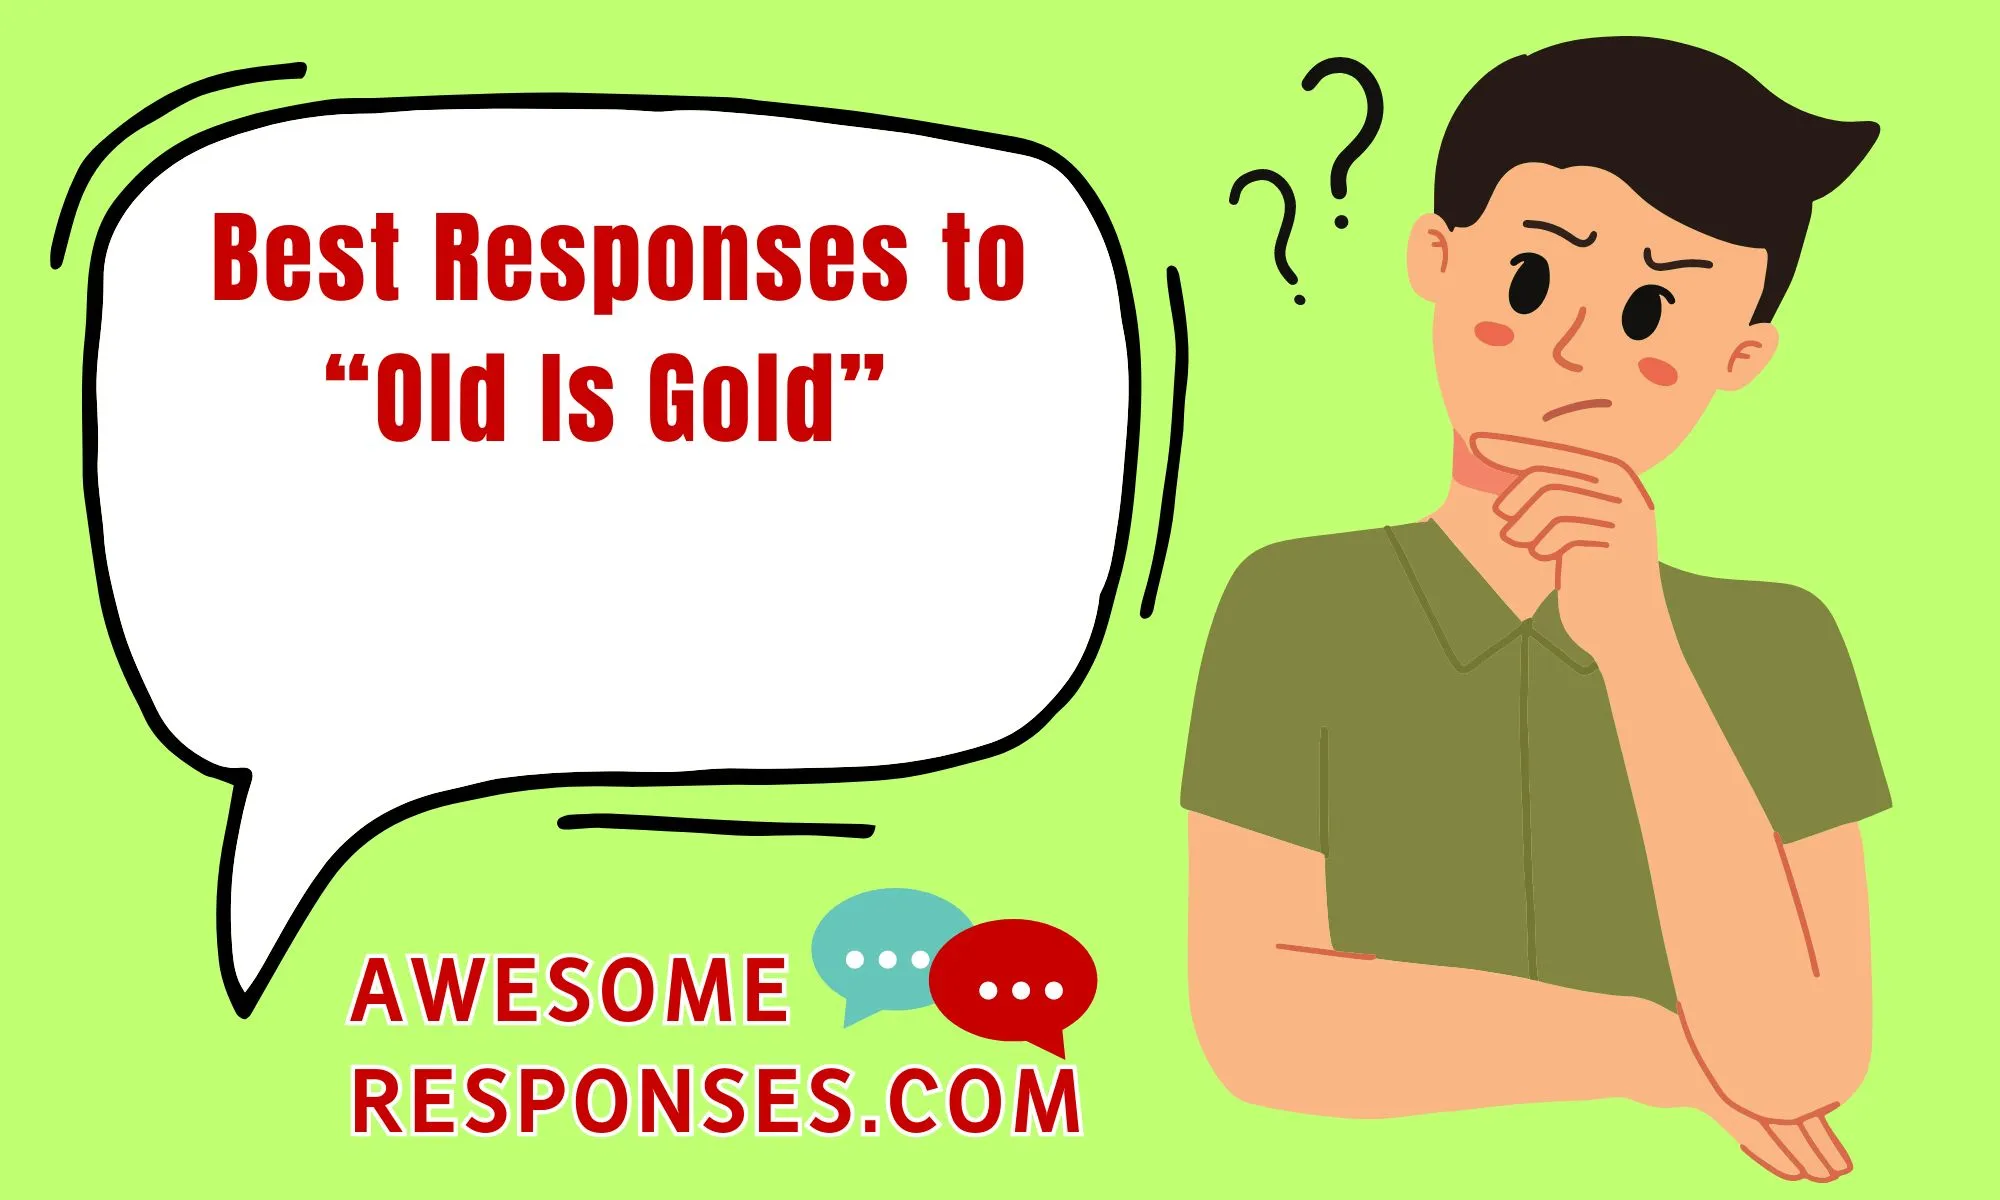 Best Responses to “Old Is Gold”